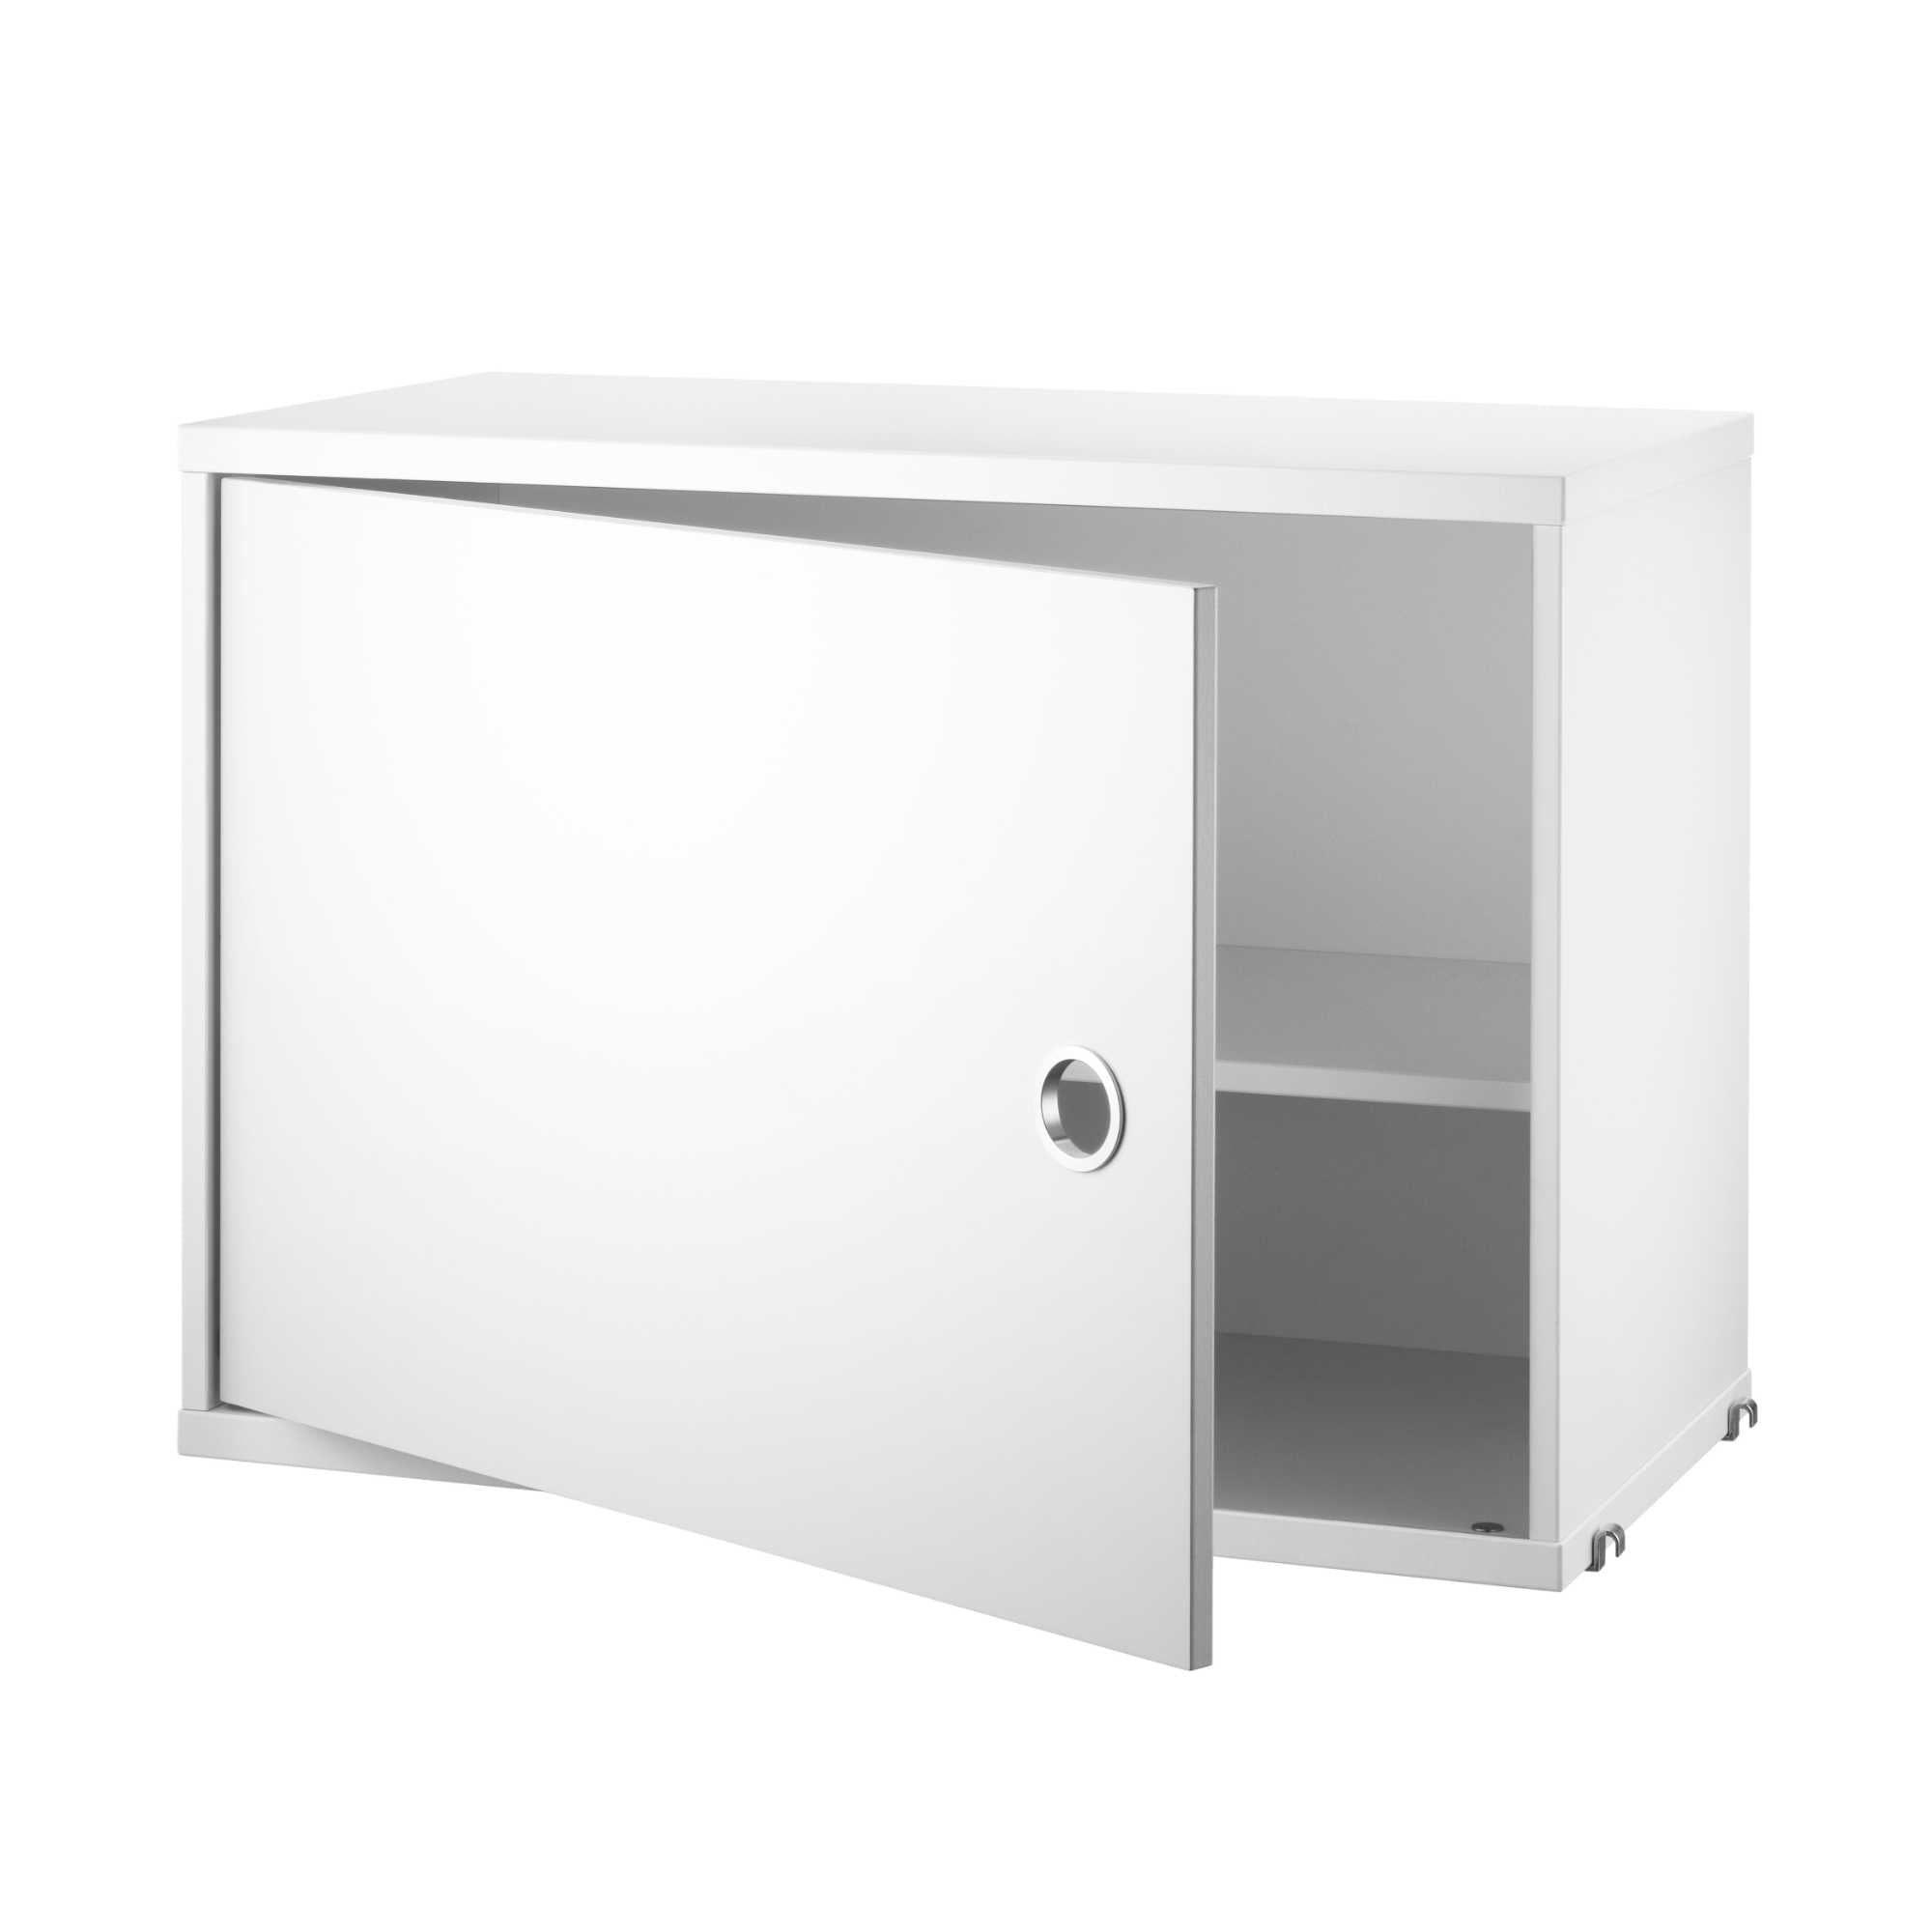 String Cabinet with swing door w58 x d30 x h42 cm, white